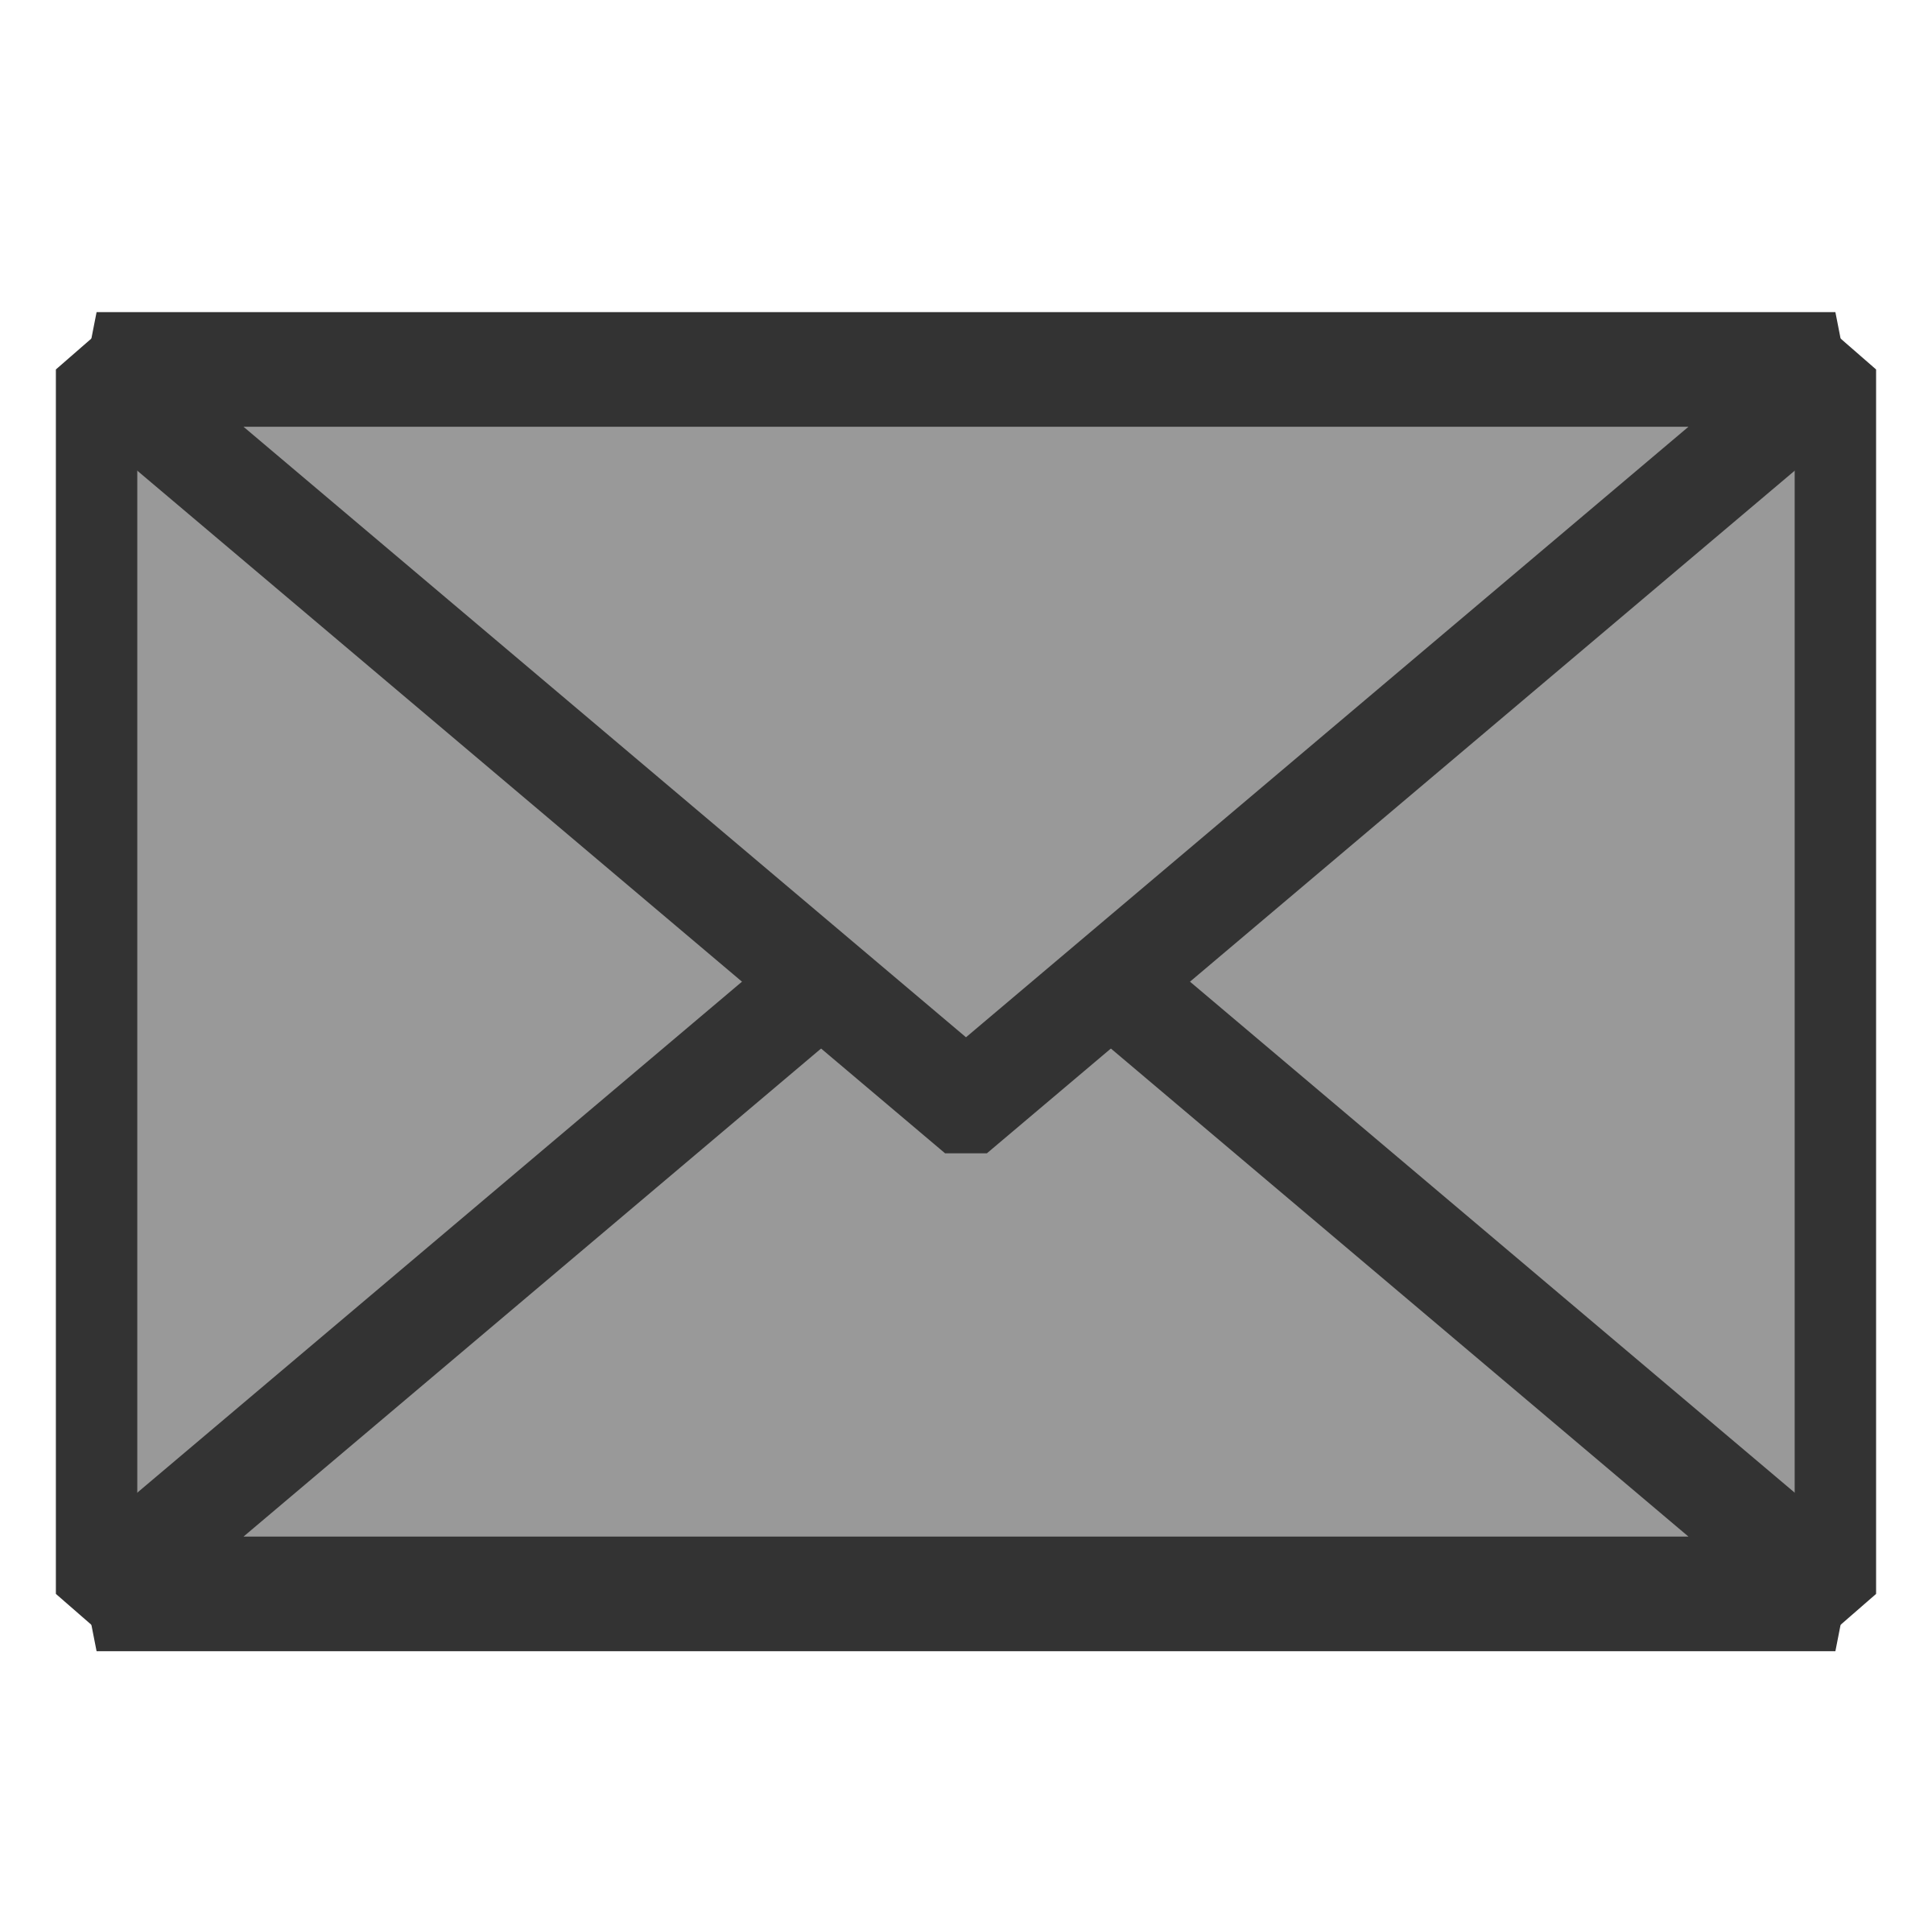 Small love letter to. Mail clipart rectangle envelope